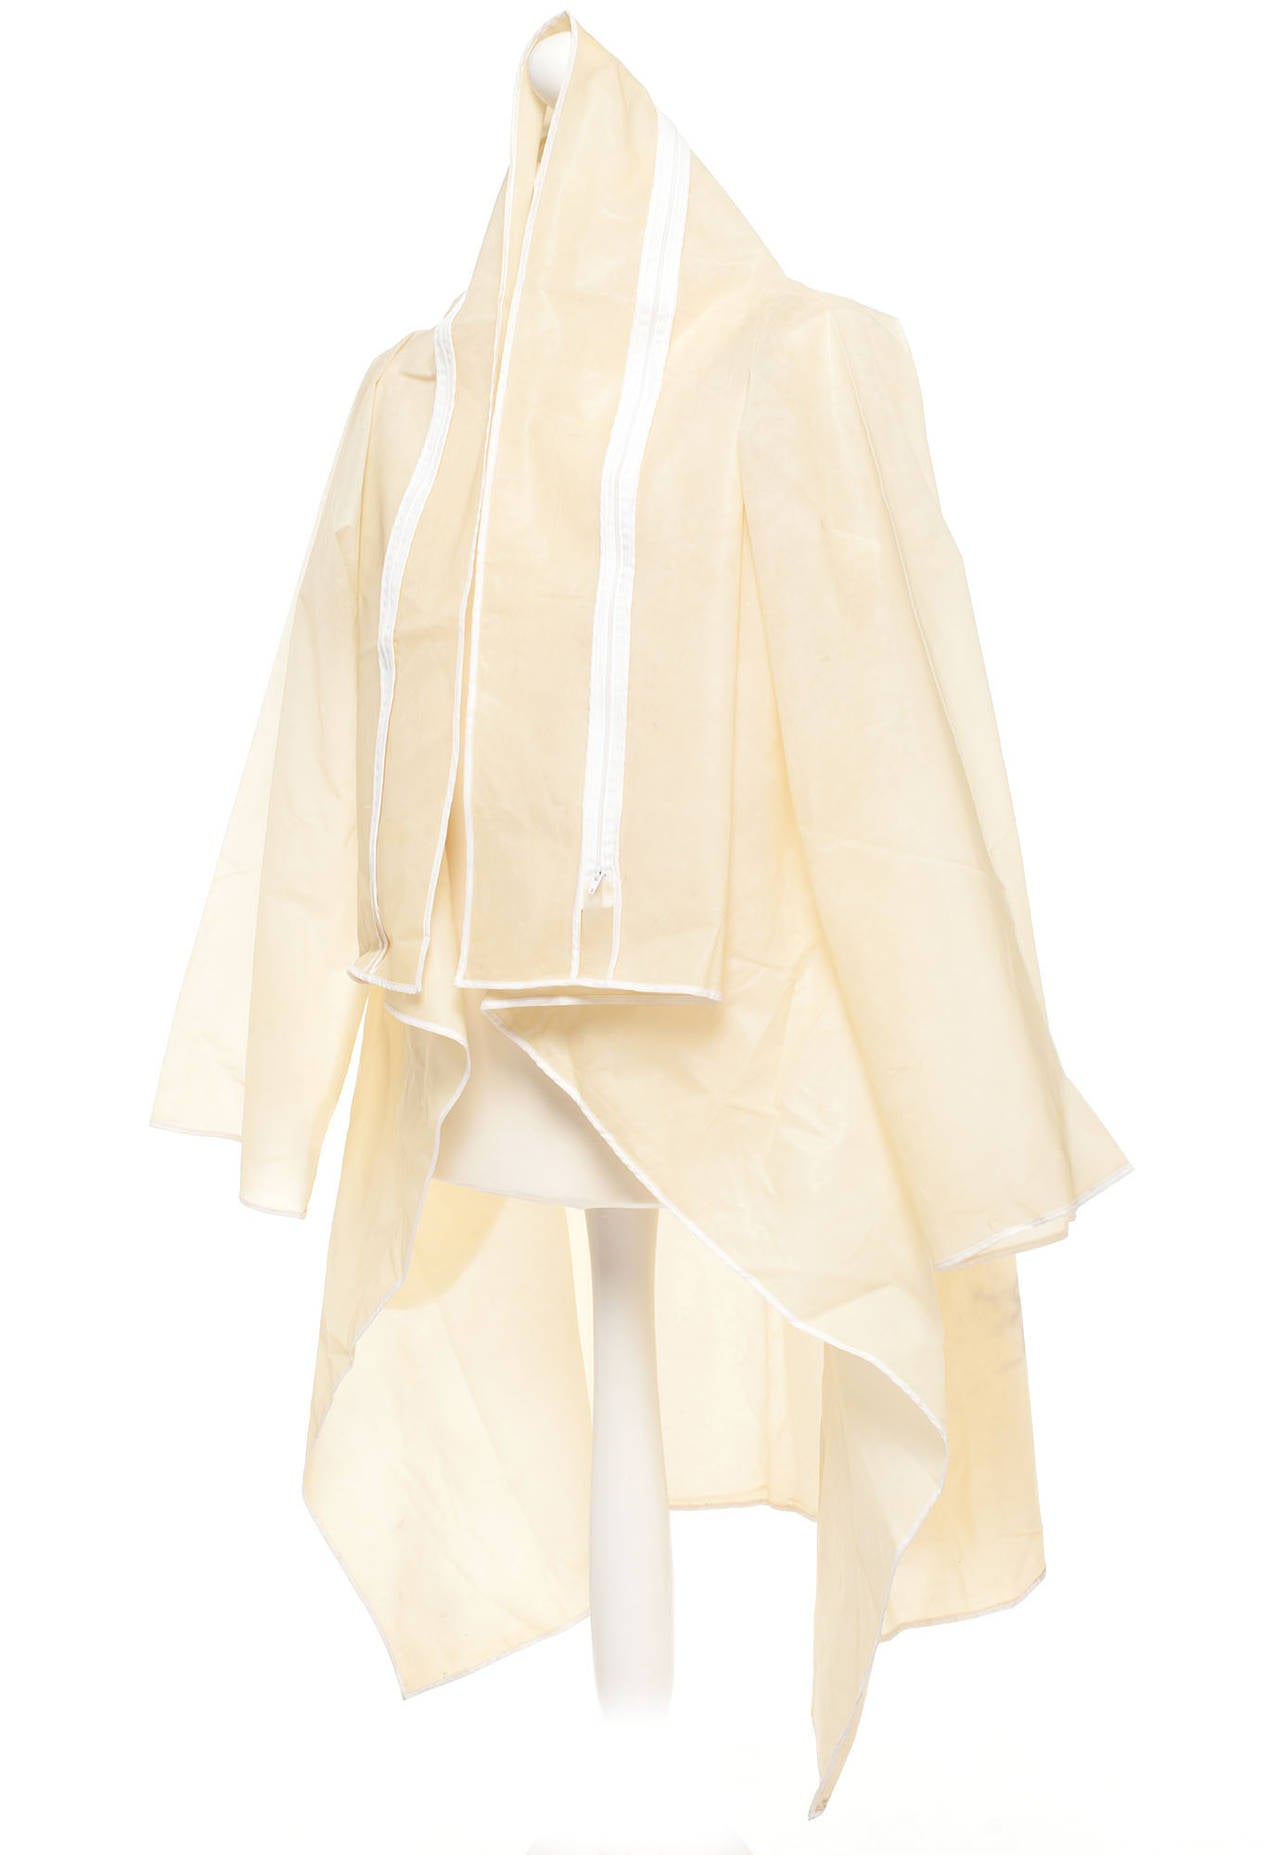 The (PVC) Duvet coat is square with detachable sleeves and designed to lie flat. The shoulders are not defined and the sleeves applied to the surface of the duvet. It can be worn as a coat, a waistcoat, and a wrap. A series of duvet covers made out